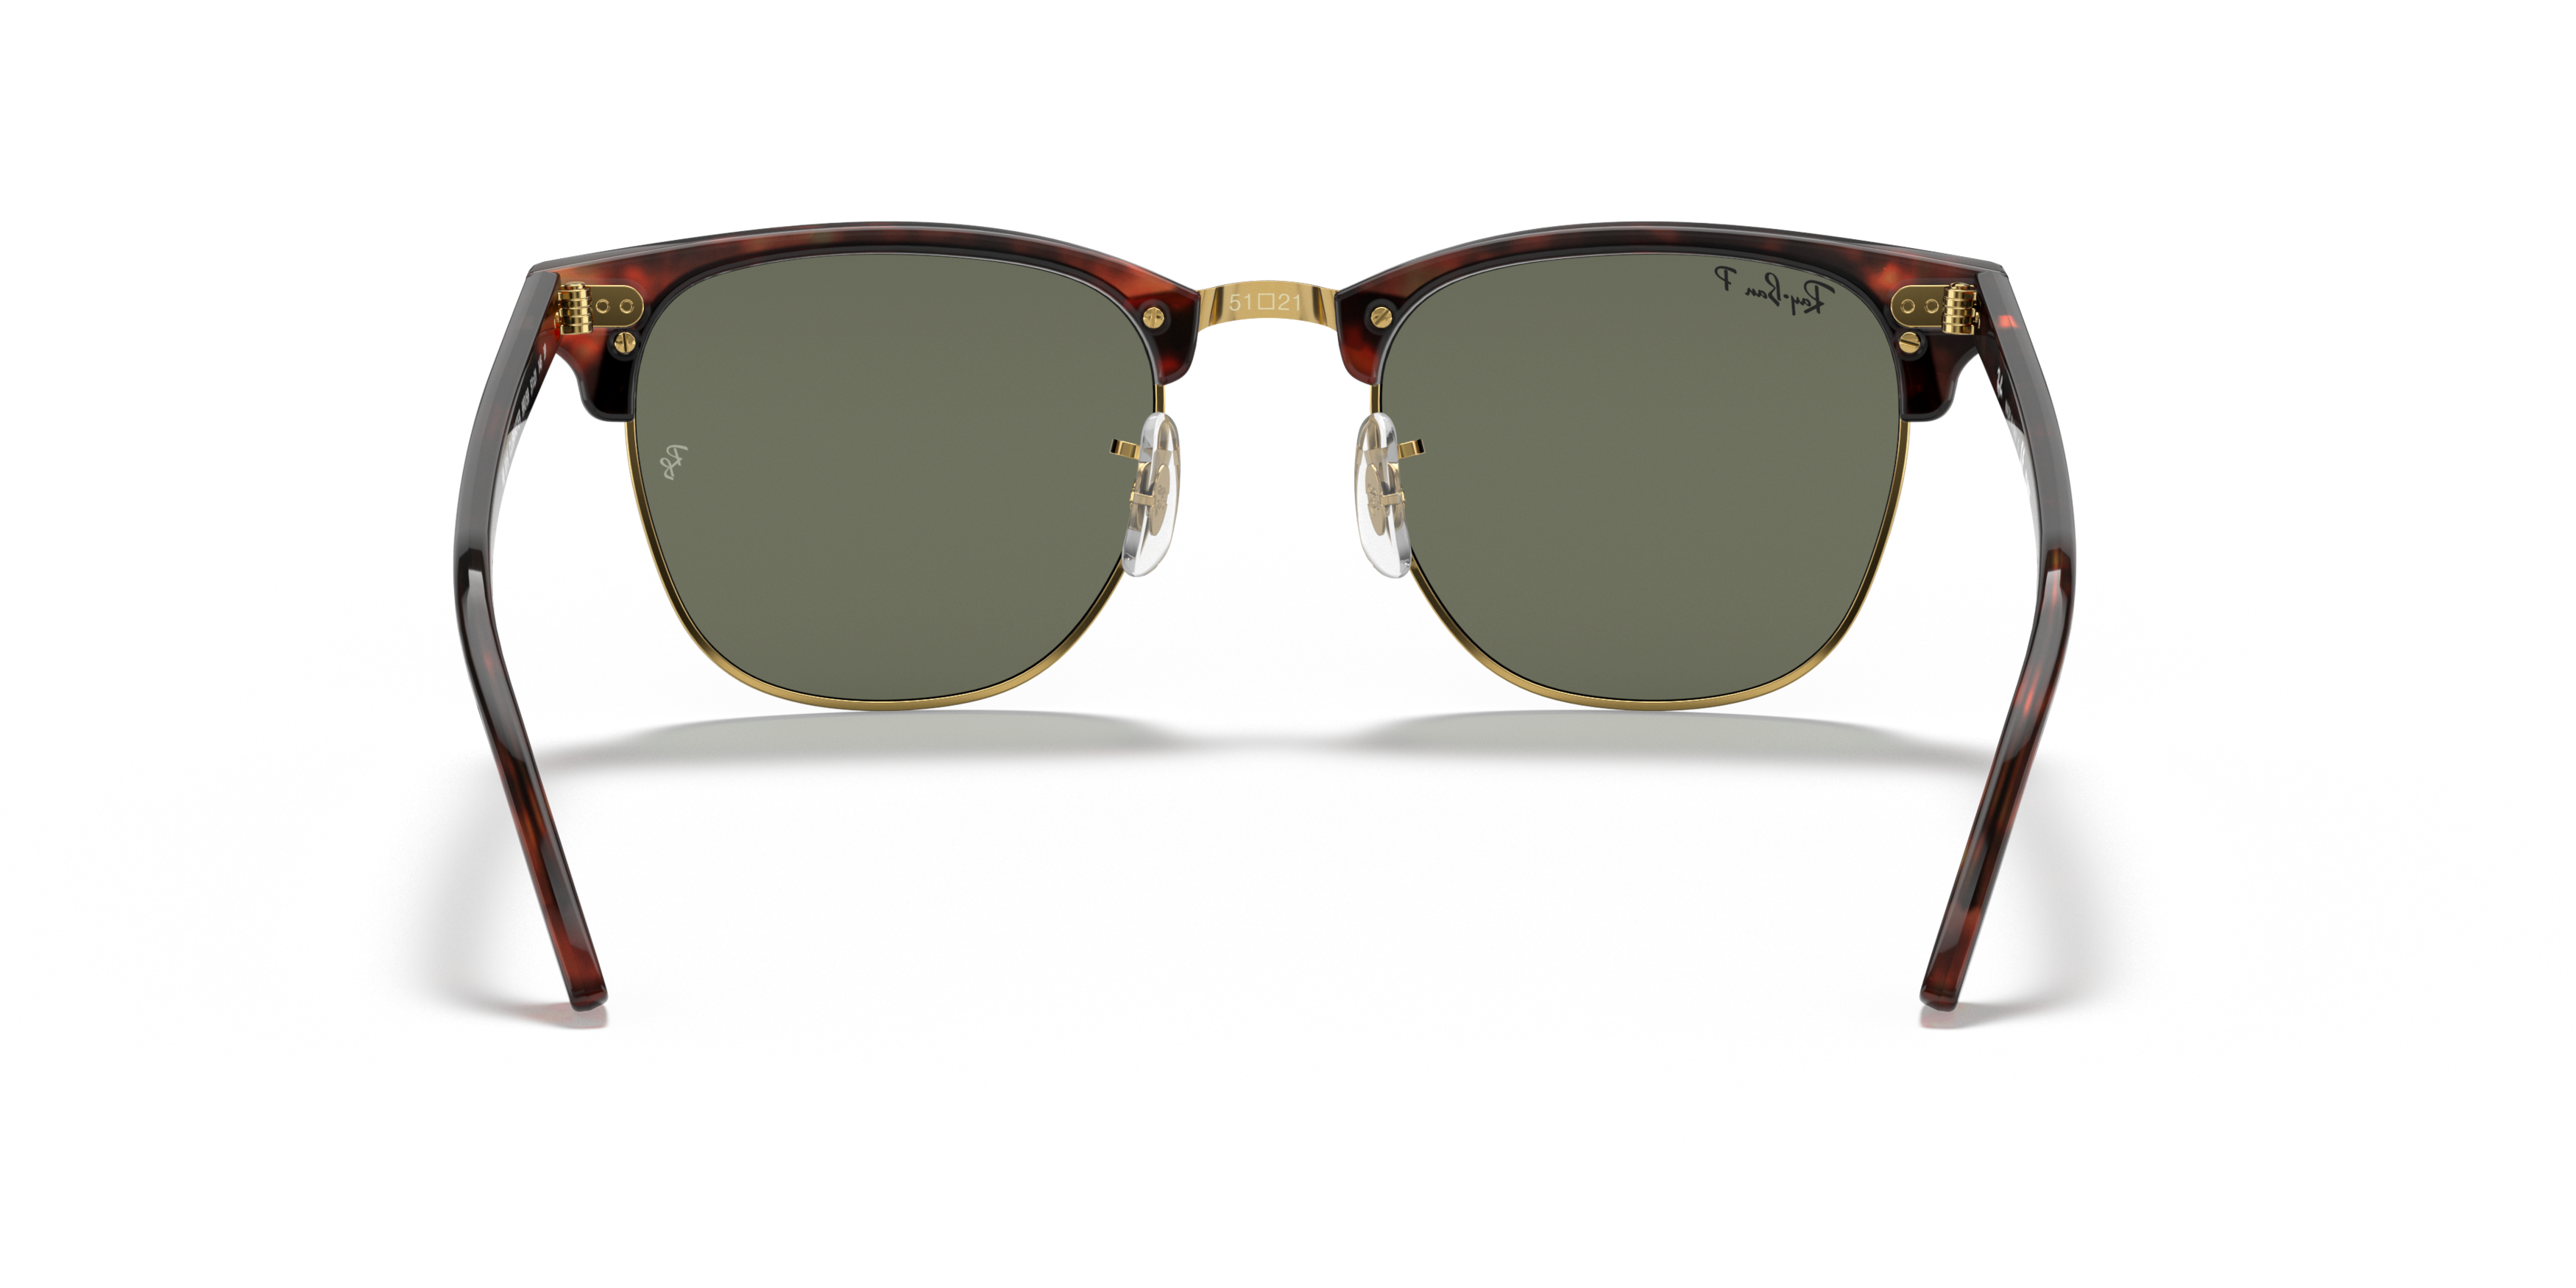 [products.image.detail02] Ray-Ban Clubmaster 0RB3016 990/58